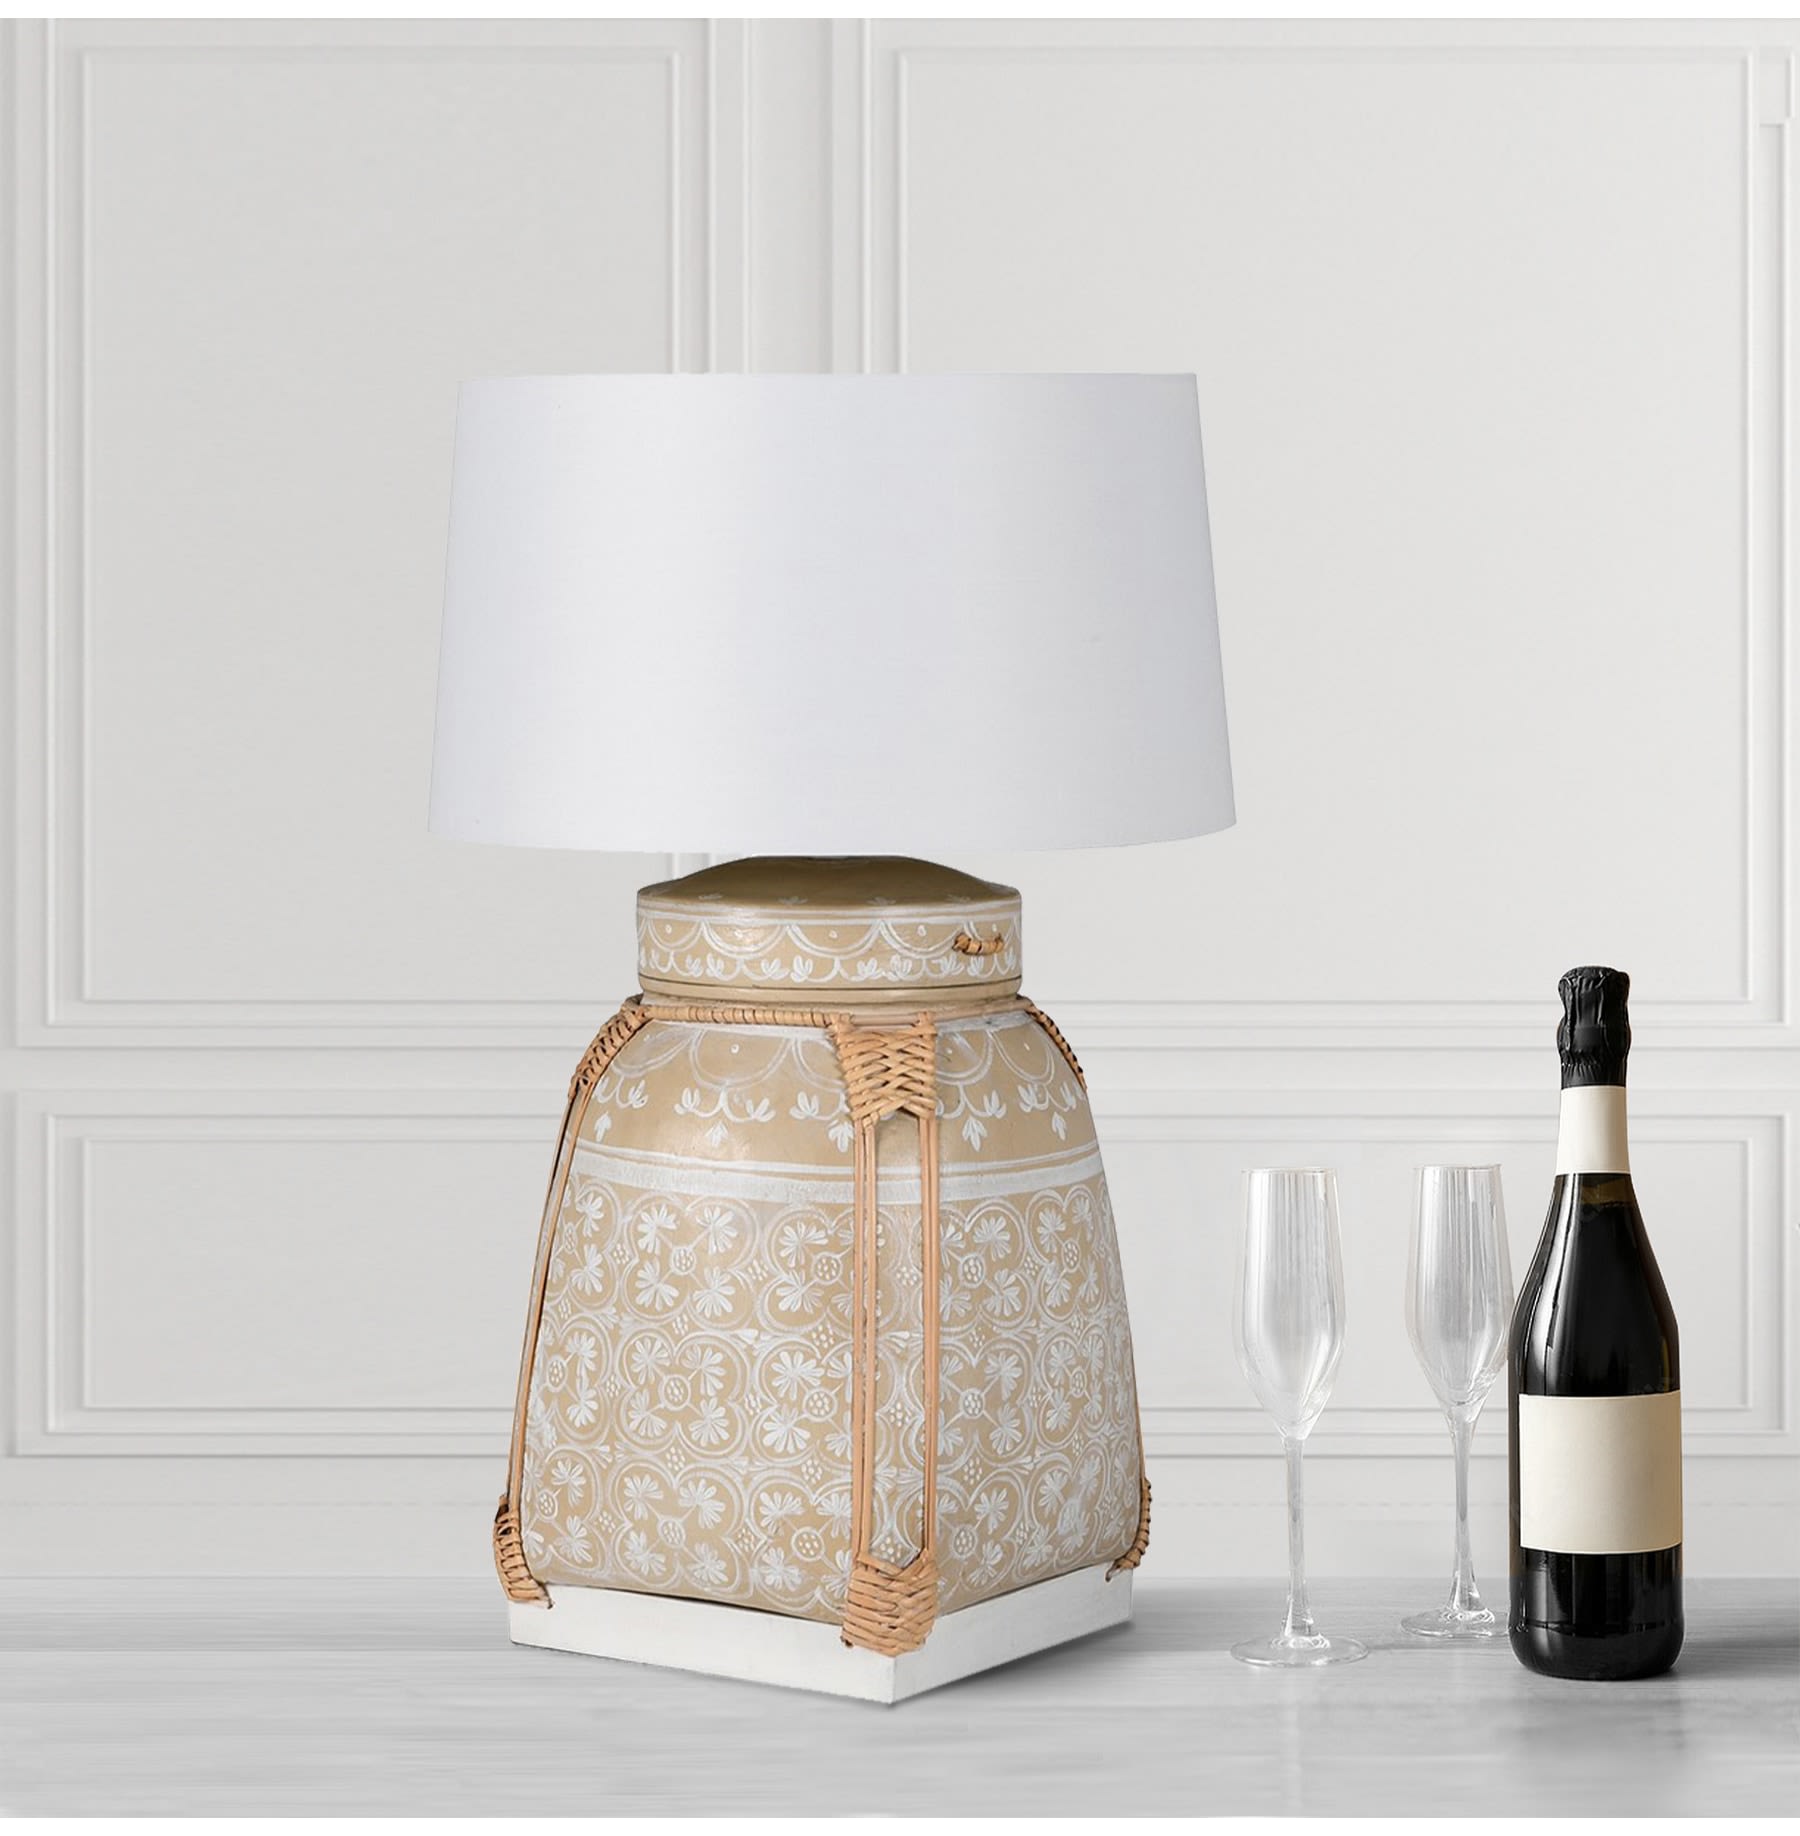 Patterned Sand Table Lamp